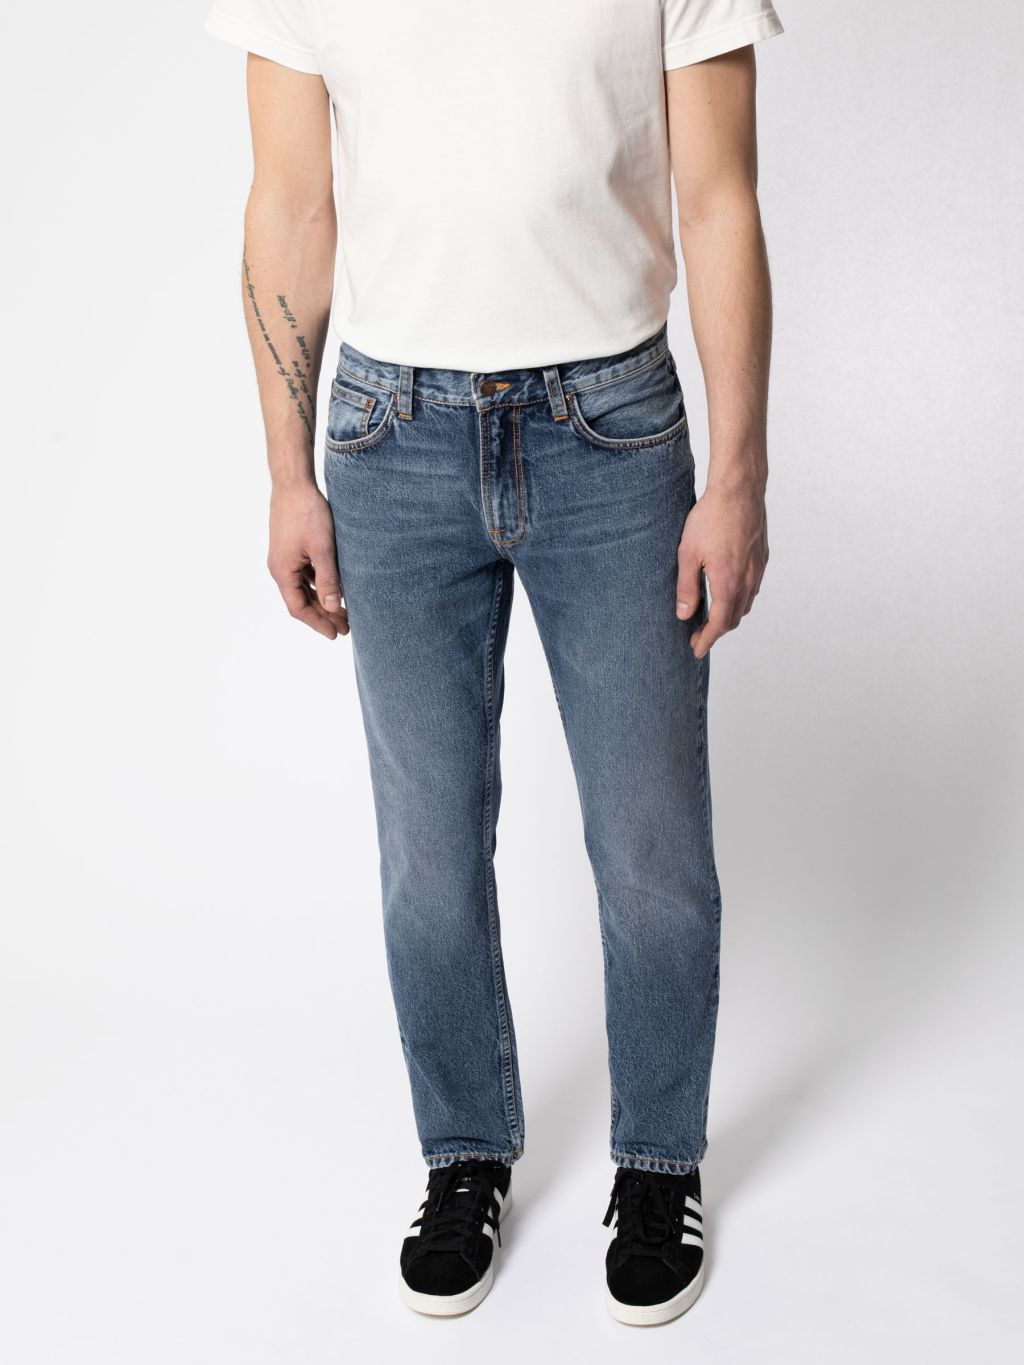 Gritty Jackson Jeans - Bio-Baumwolle-Mix Far Out 32/32